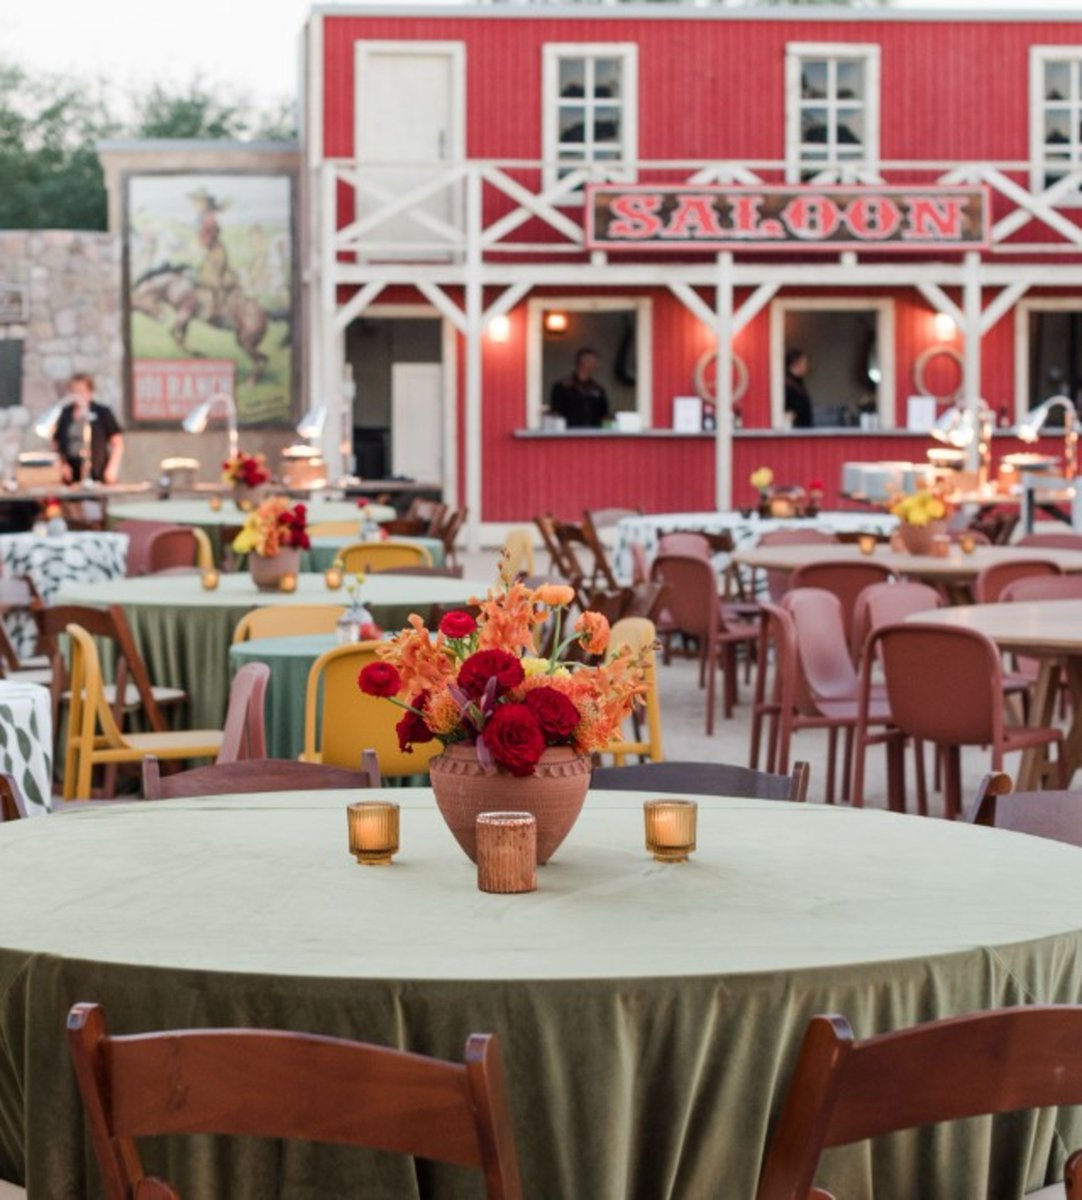 We know how to take your events to the next level. Studio F is here to bring your dreams to life with venues straight out of a Hollywood blockbuster, like our newest charming Southwestern township, Copper Canyon! Start planning your event today: rebrand.ly/towngvc